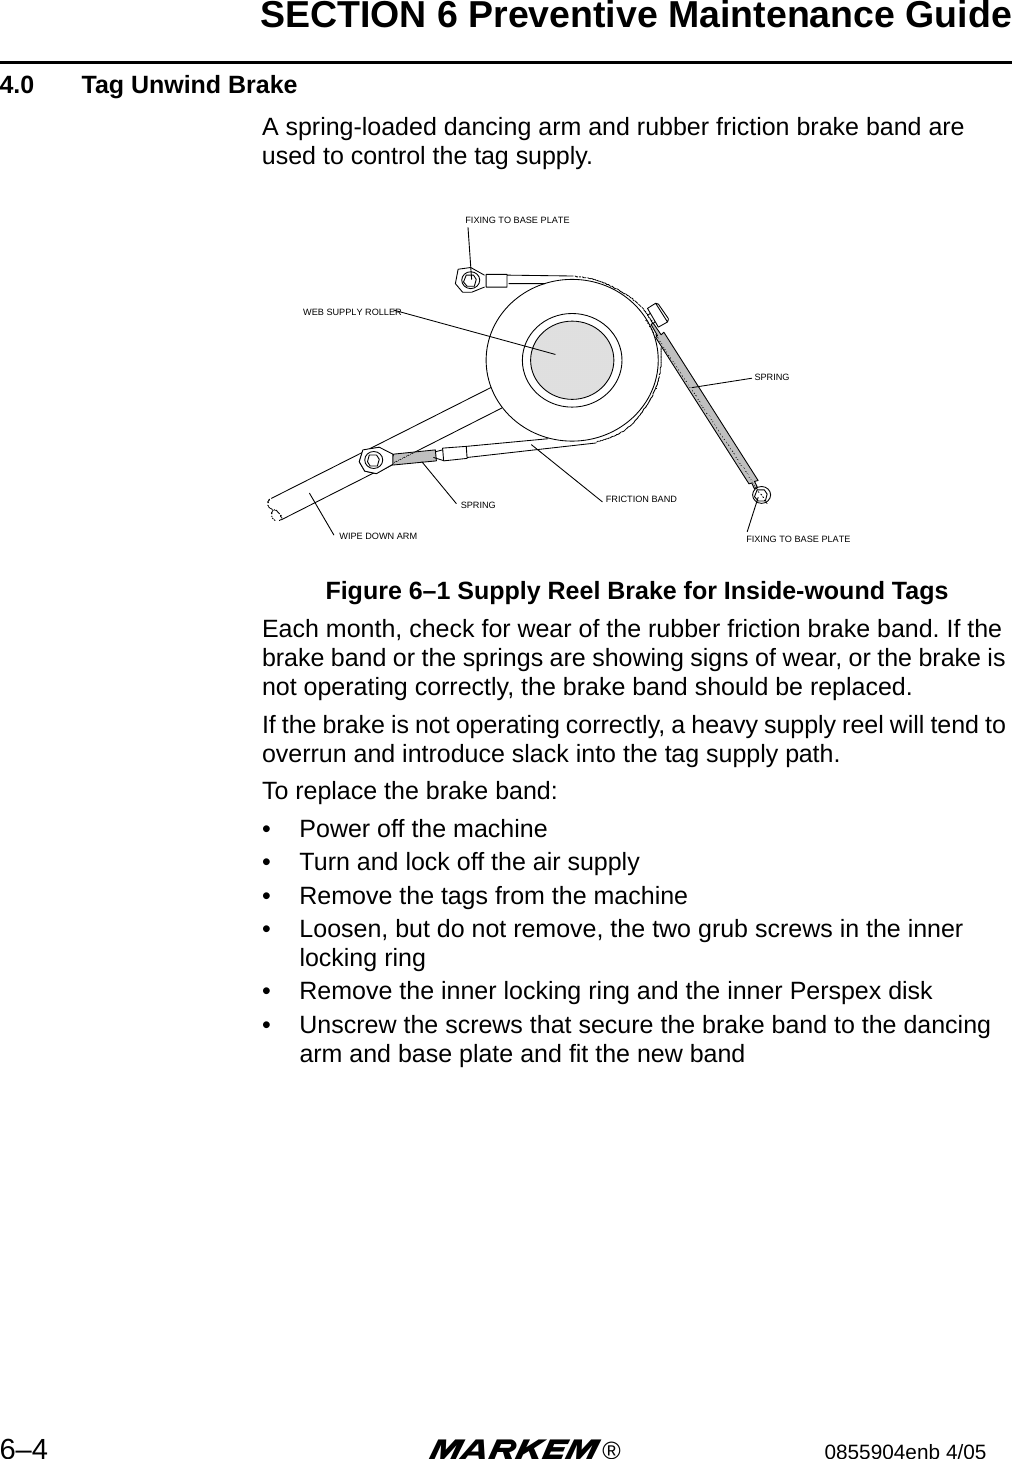 SECTION 6 Preventive Maintenance Guide6–4 m®0855904enb 4/05 4.0  Tag Unwind BrakeA spring-loaded dancing arm and rubber friction brake band are used to control the tag supply.Figure 6–1 Supply Reel Brake for Inside-wound TagsEach month, check for wear of the rubber friction brake band. If the brake band or the springs are showing signs of wear, or the brake is not operating correctly, the brake band should be replaced.If the brake is not operating correctly, a heavy supply reel will tend to overrun and introduce slack into the tag supply path.To replace the brake band:• Power off the machine• Turn and lock off the air supply• Remove the tags from the machine• Loosen, but do not remove, the two grub screws in the inner locking ring• Remove the inner locking ring and the inner Perspex disk• Unscrew the screws that secure the brake band to the dancing arm and base plate and fit the new bandWIPE DOWN ARMSPRING FRICTION BANDSPRINGWEB SUPPLY ROLLERFIXING TO BASE PLATEFIXING TO BASE PLATE